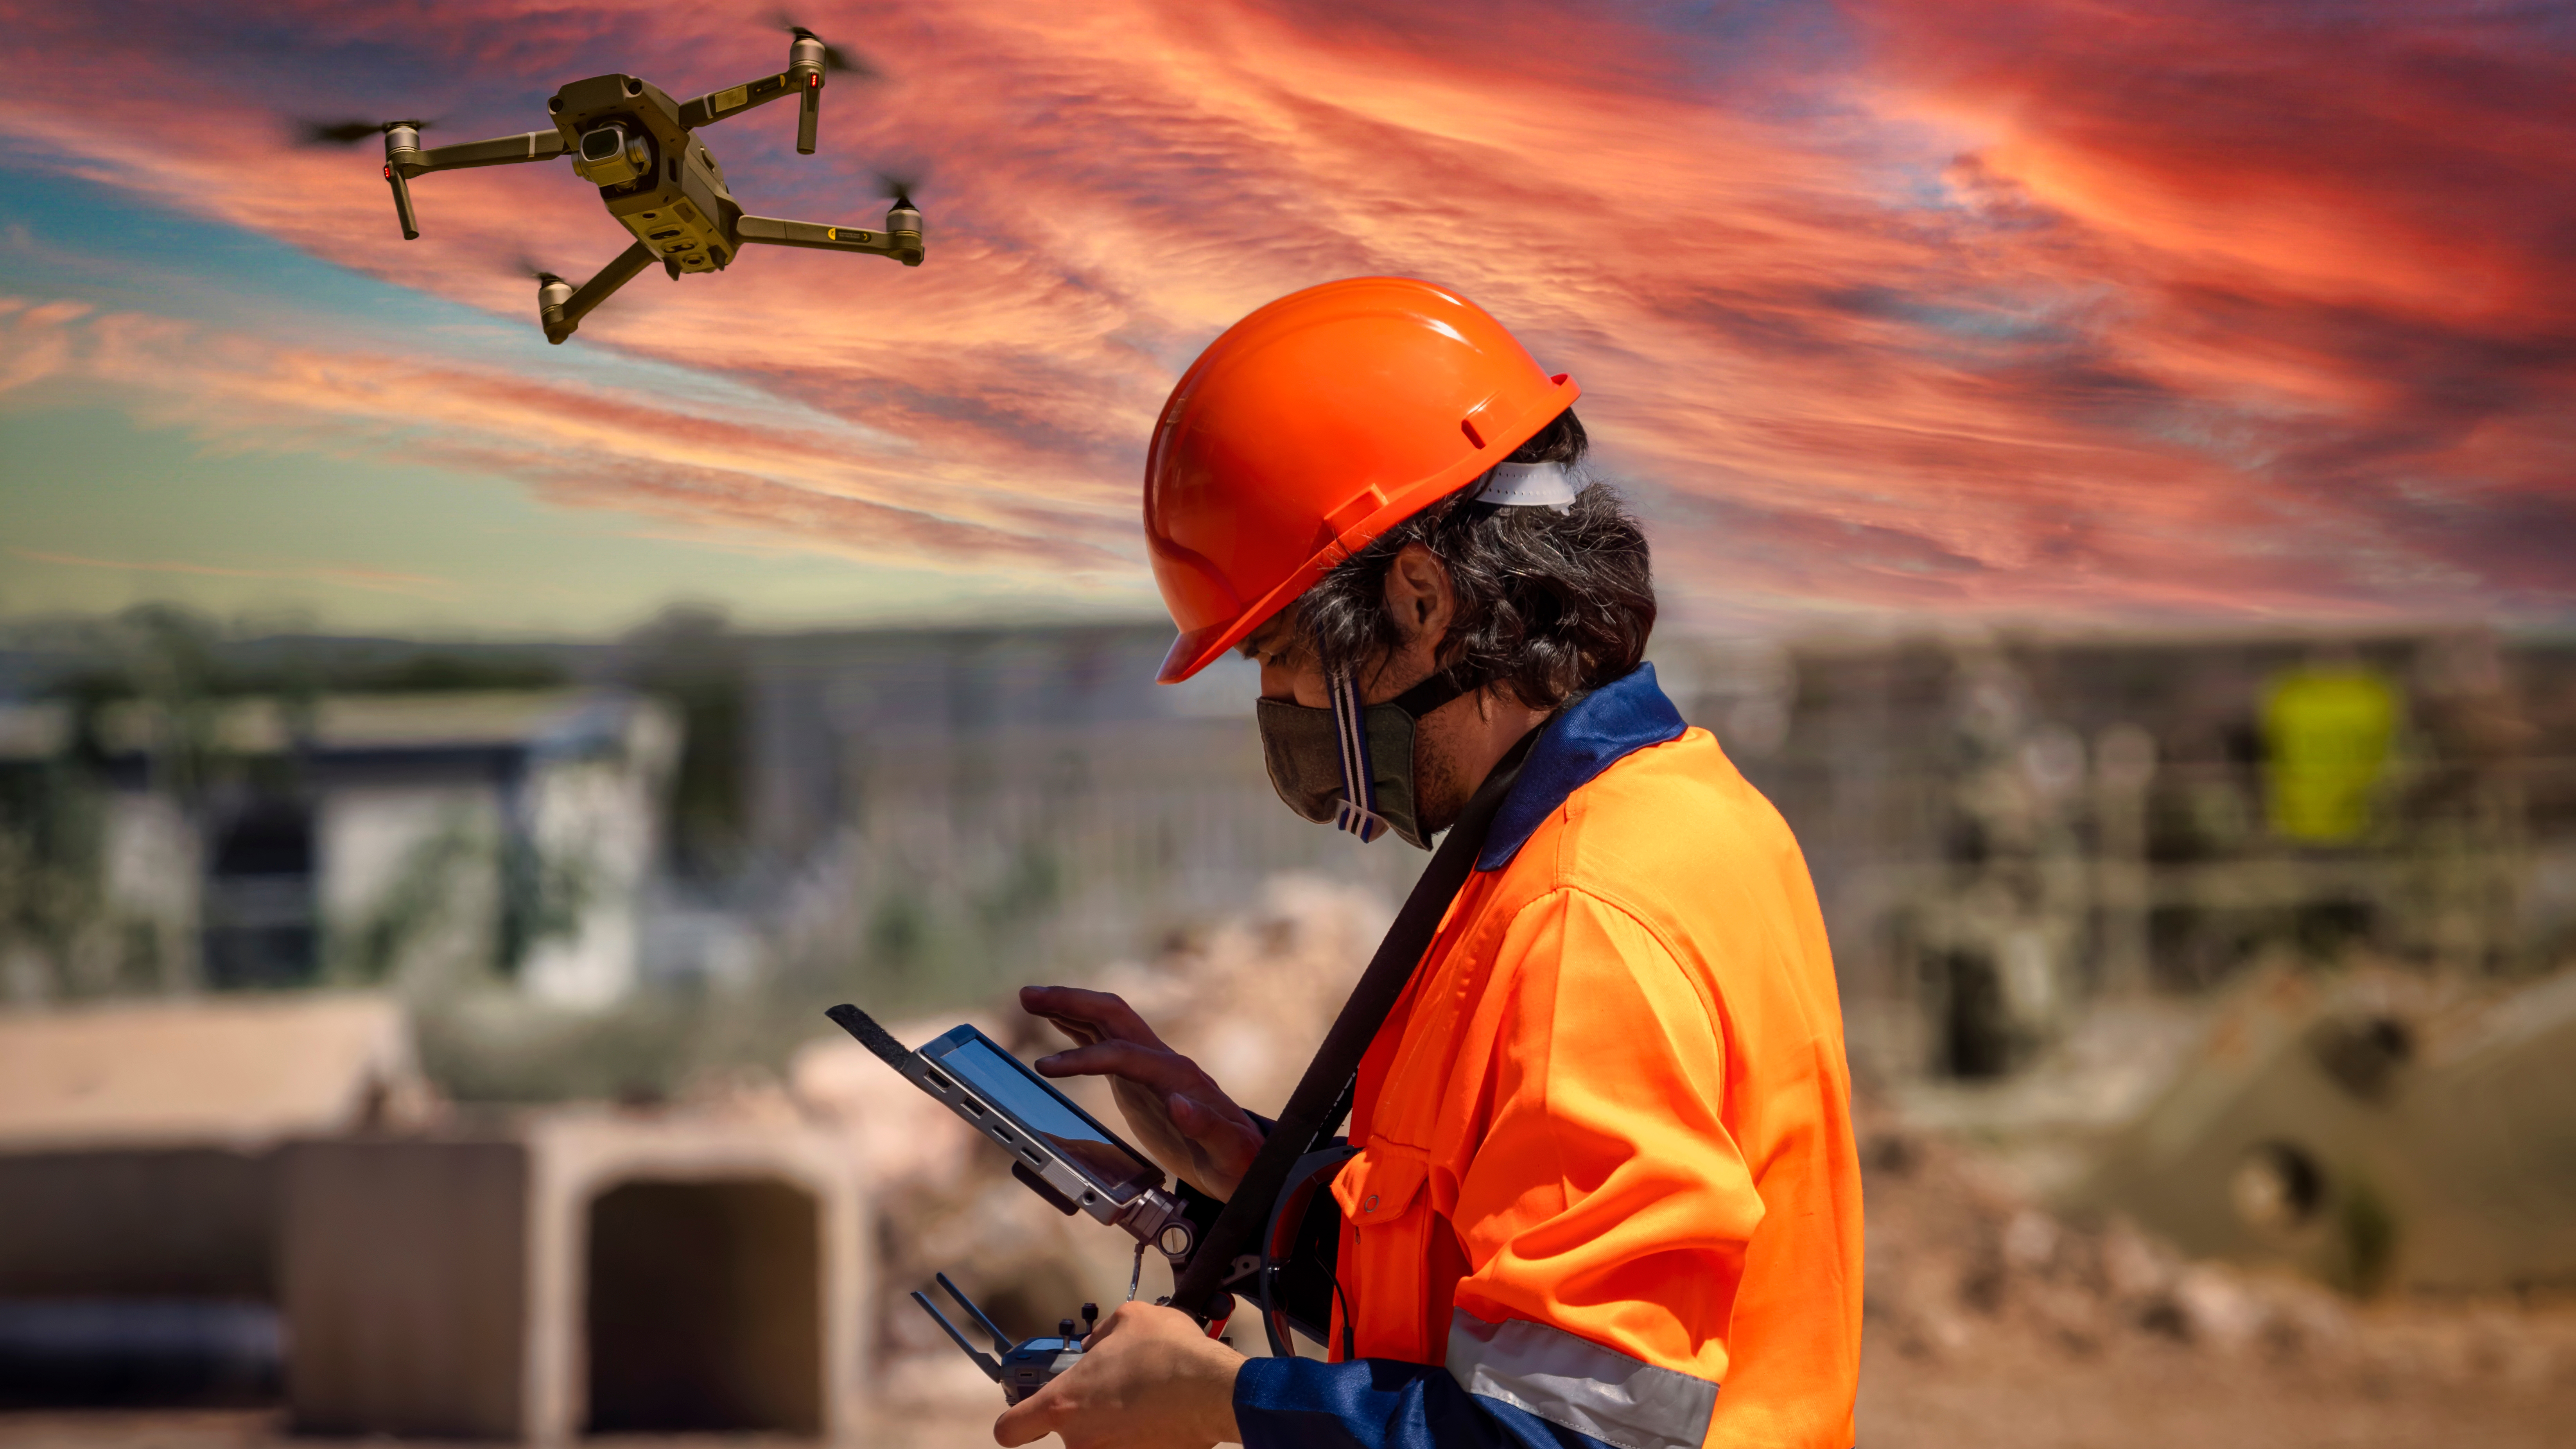 Man wearing a hard hat operates a drone at a mining facility.